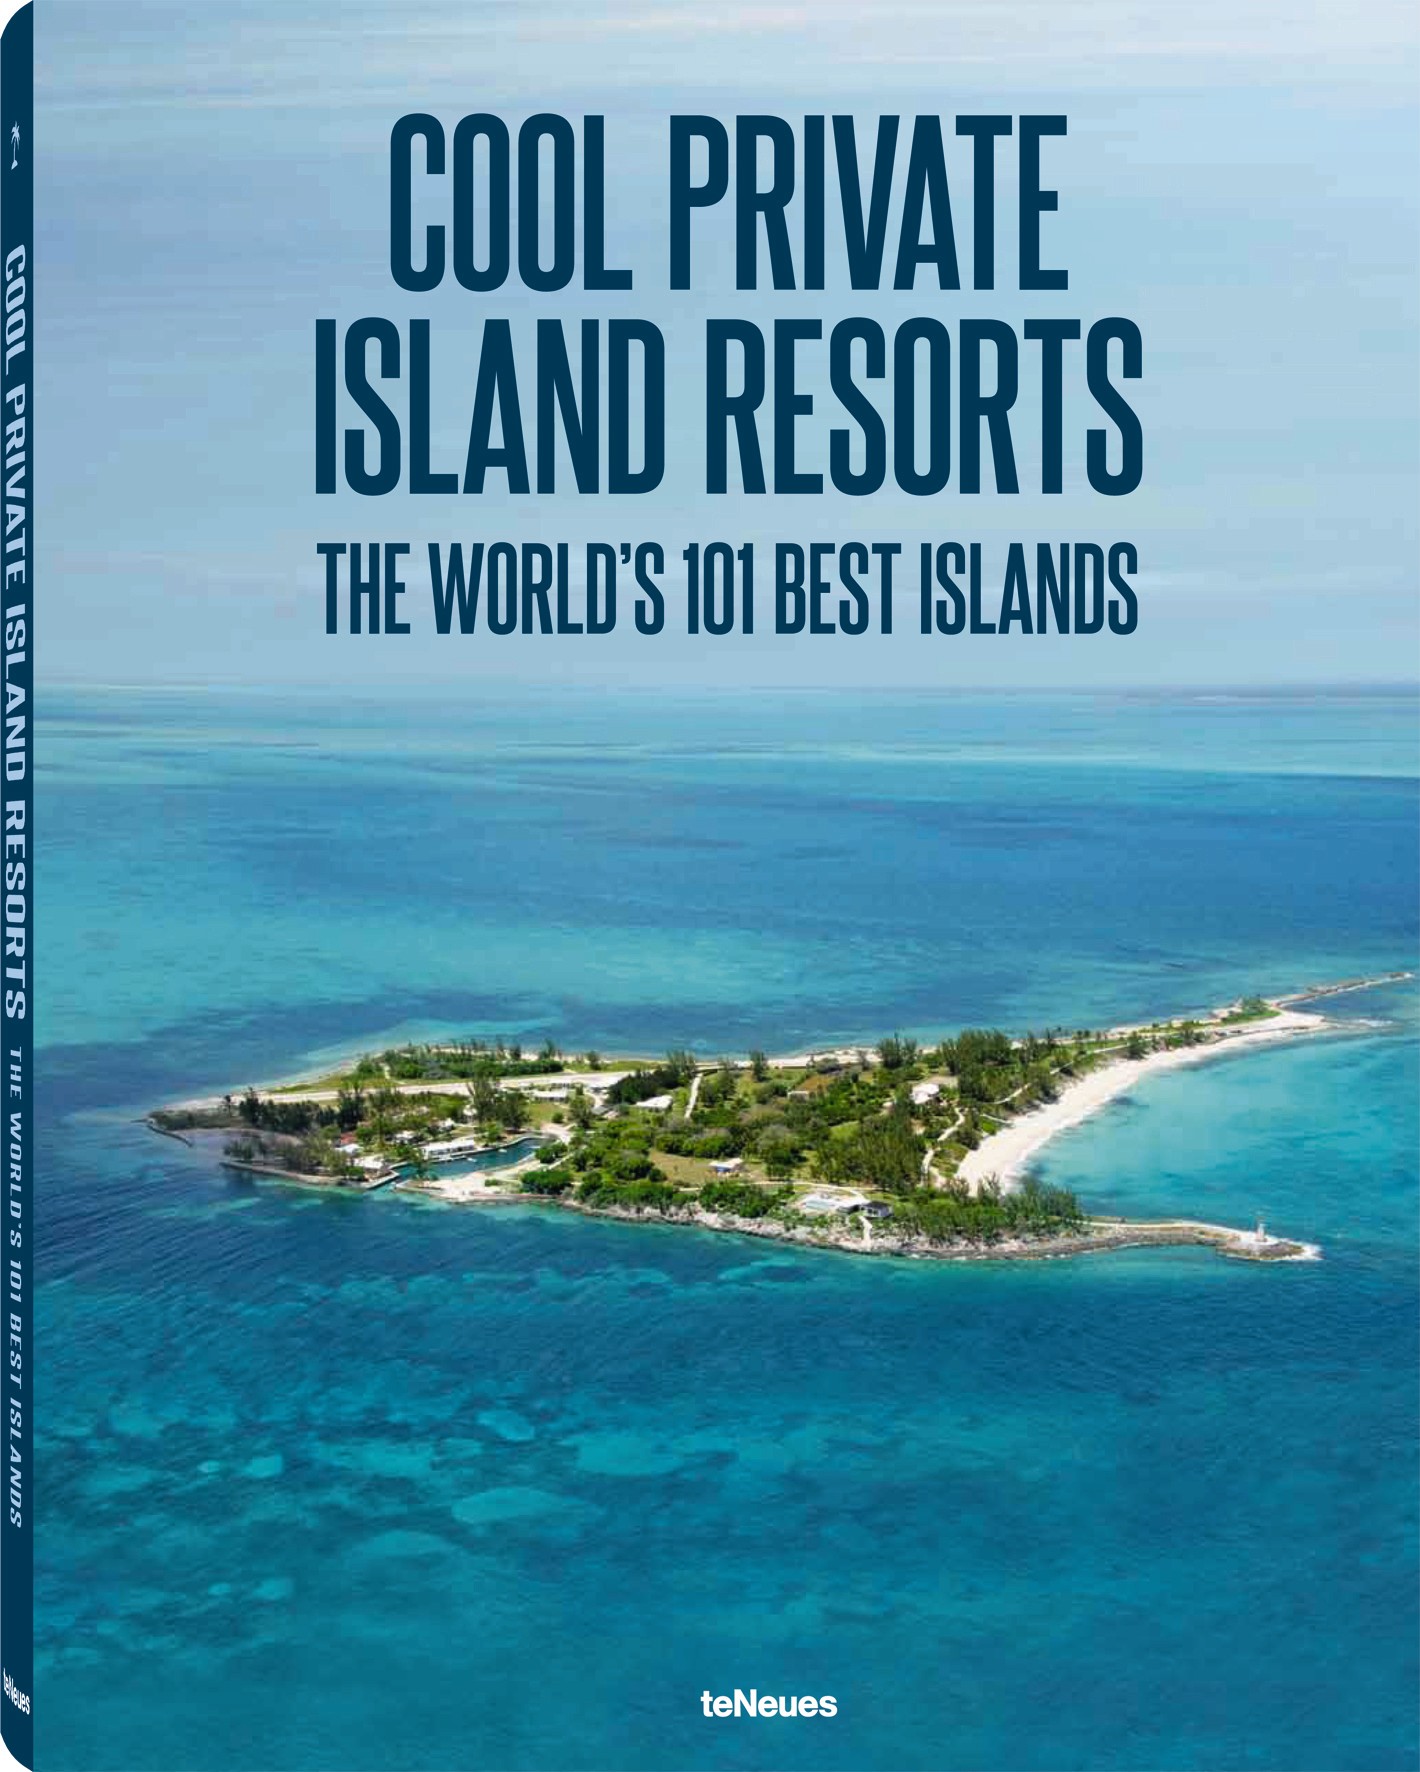 Better and island. Treasou Islands books. What's the book about Island for sale. Rent a private Island for a week.